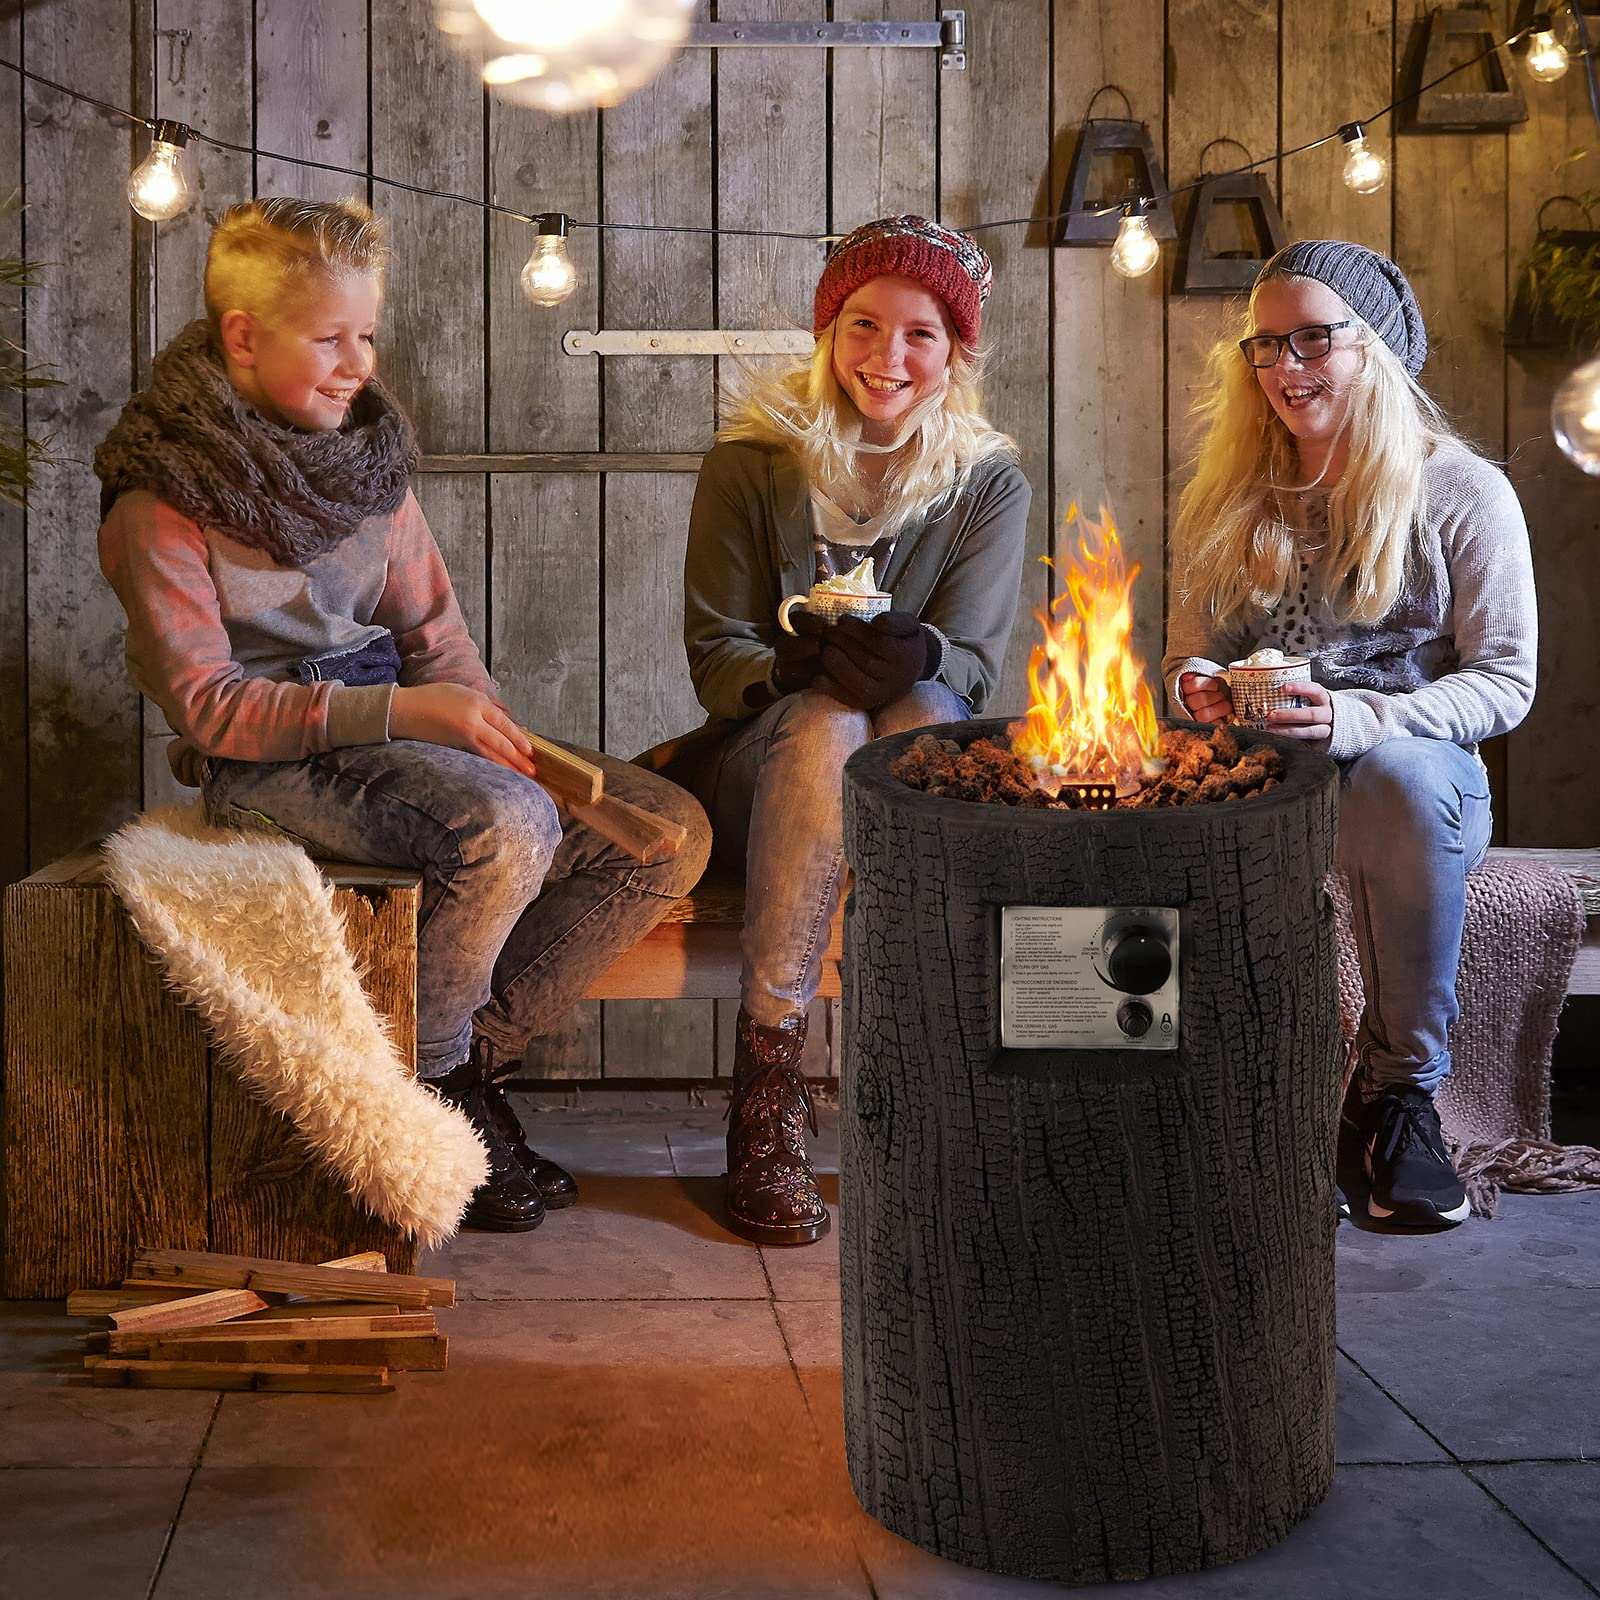 Giantex Fire Pit Outdoor 16" Electronic Ignition Round Fireplace with 30,000 BTU Heat Output